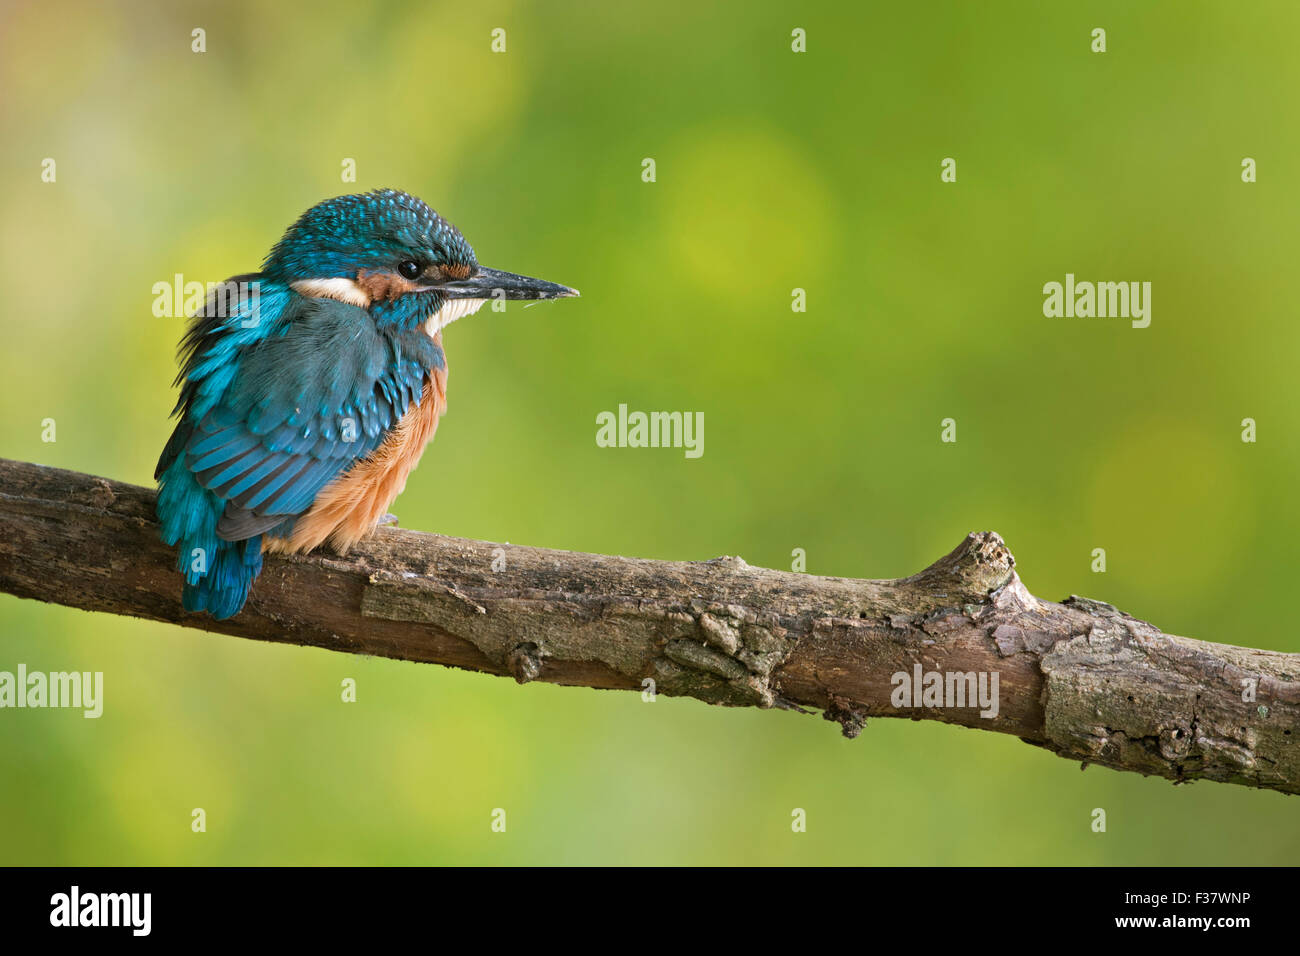 Very young precarious Common Kingfisher / Kingfisher / Eisvogel ( Alcedo atthis ) perched on a branch. Stock Photo